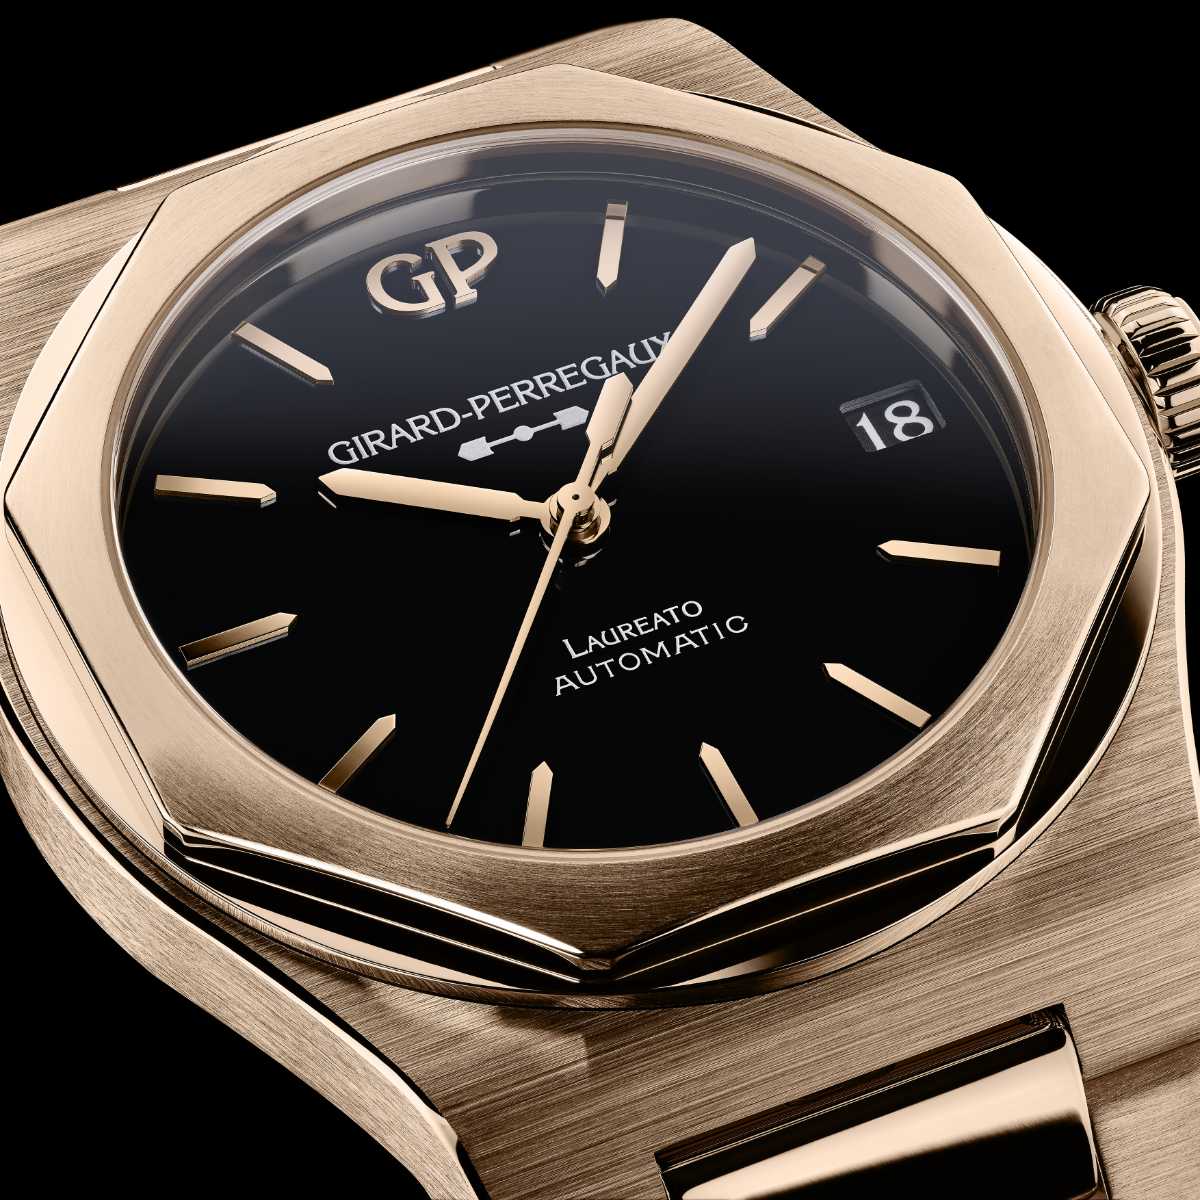 Girard-Perregaux Laureato 42mm Pink Gold & Onyx: A Symphony Of Shapes And Sumptuous Hues